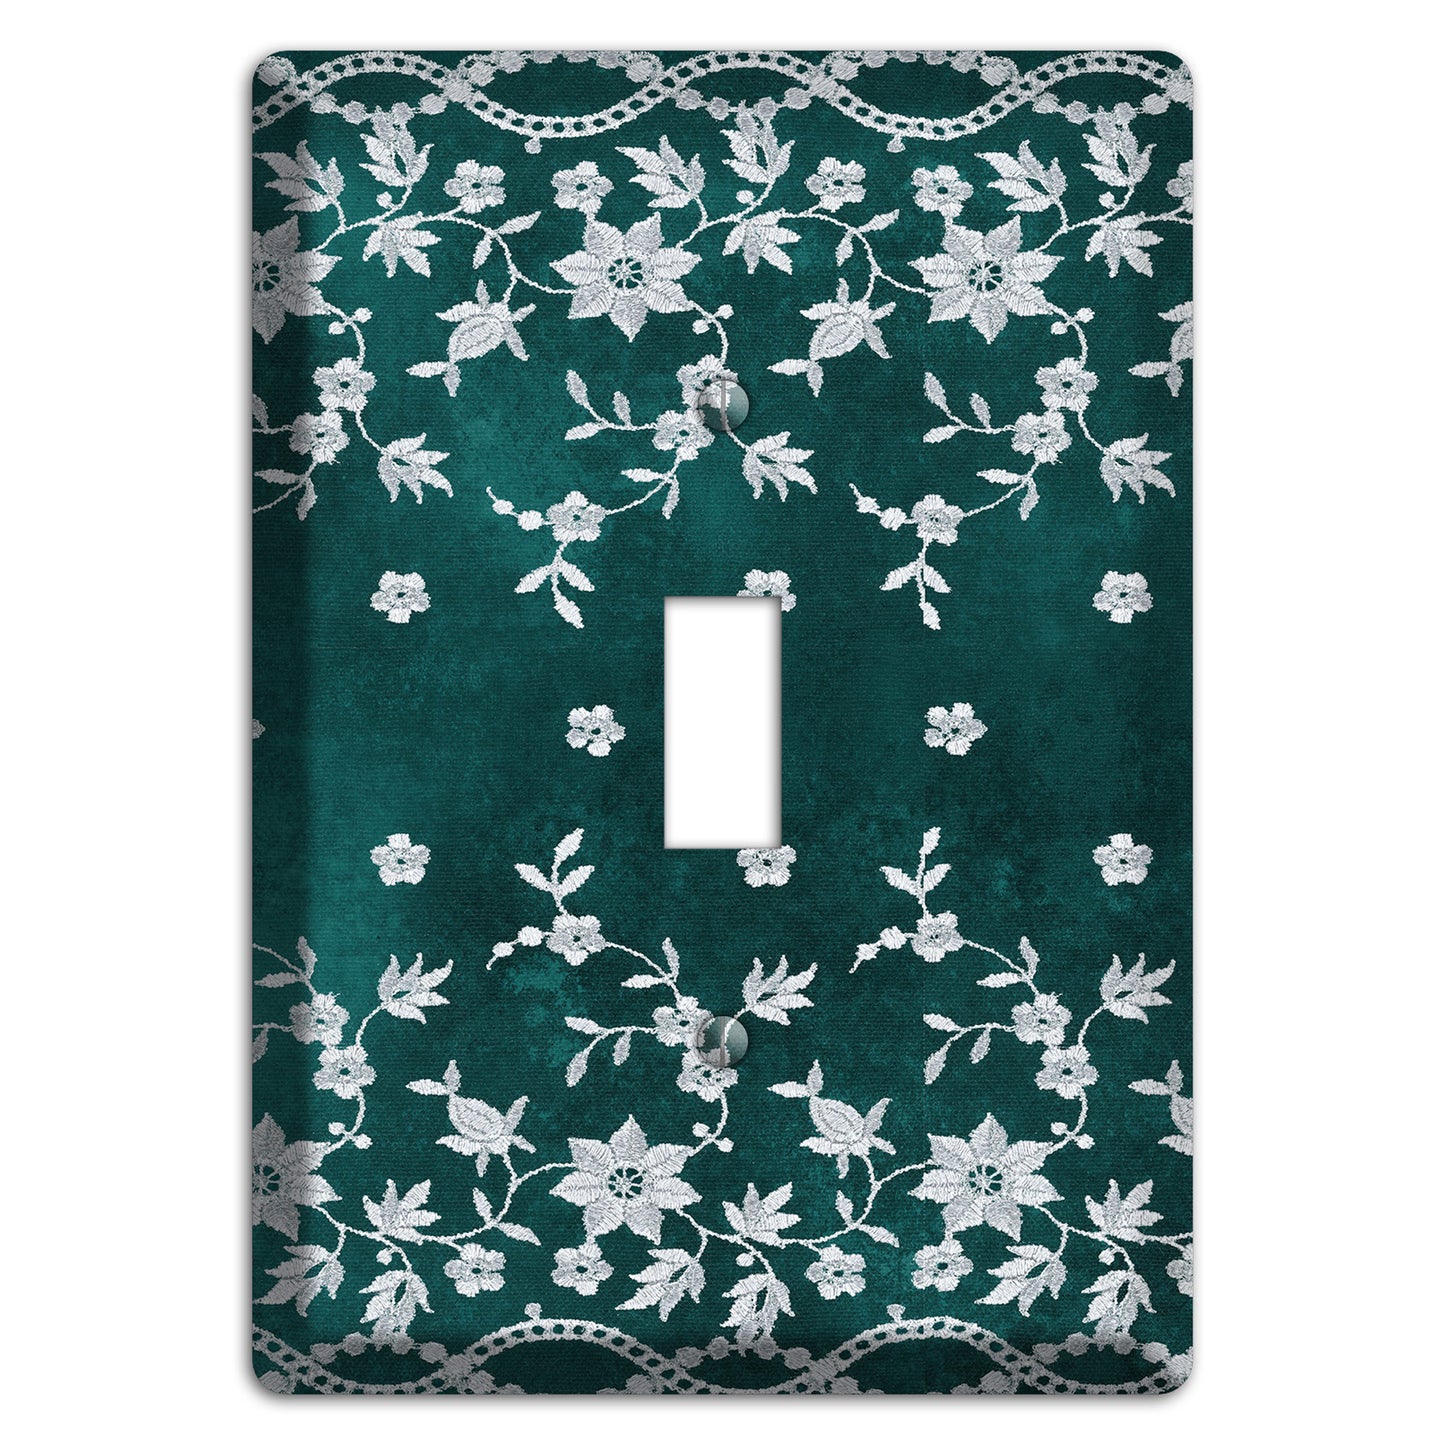 Embroidered Floral Teal Cover Plates